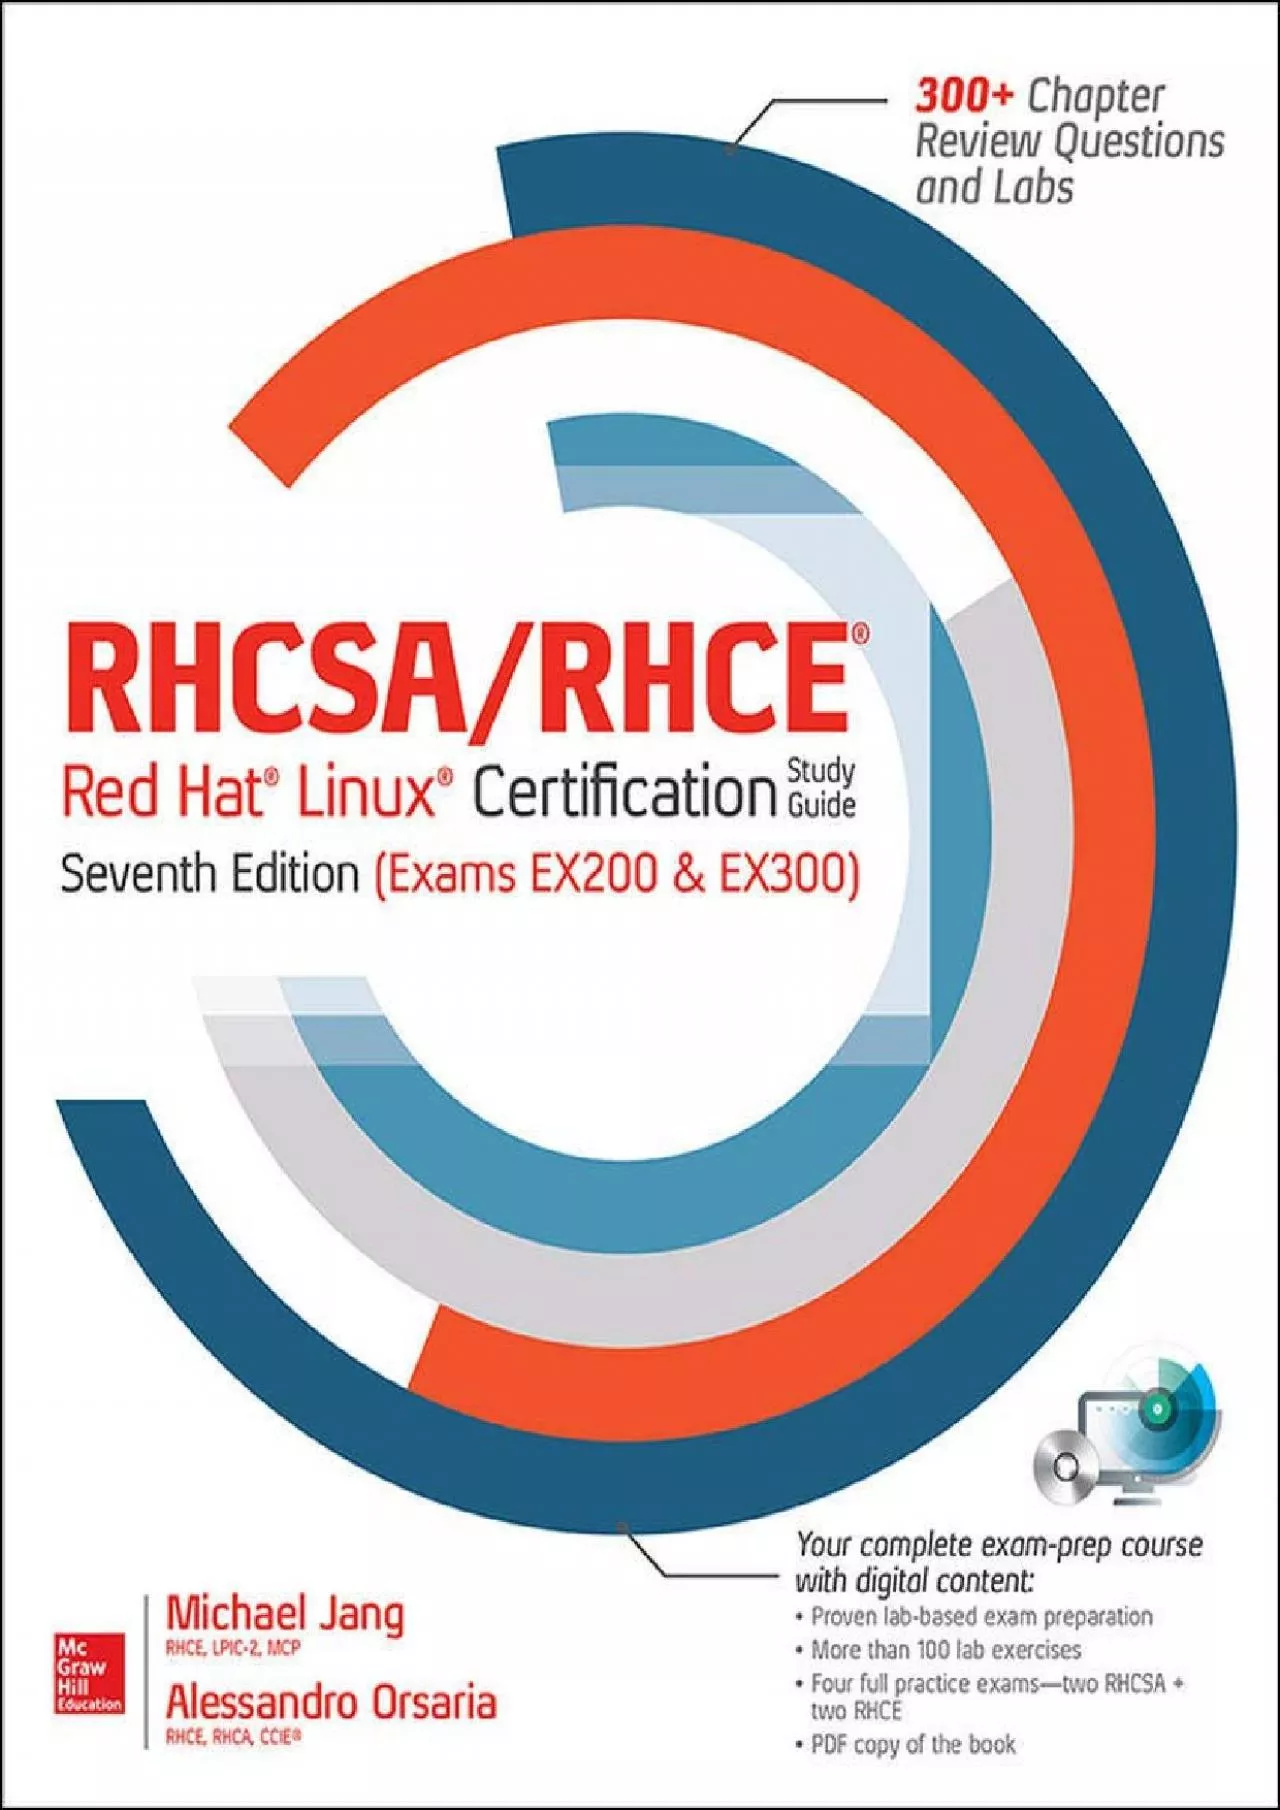 [PDF]-RHCSA/RHCE Red Hat Linux Certification Study Guide, Seventh Edition (Exams EX200